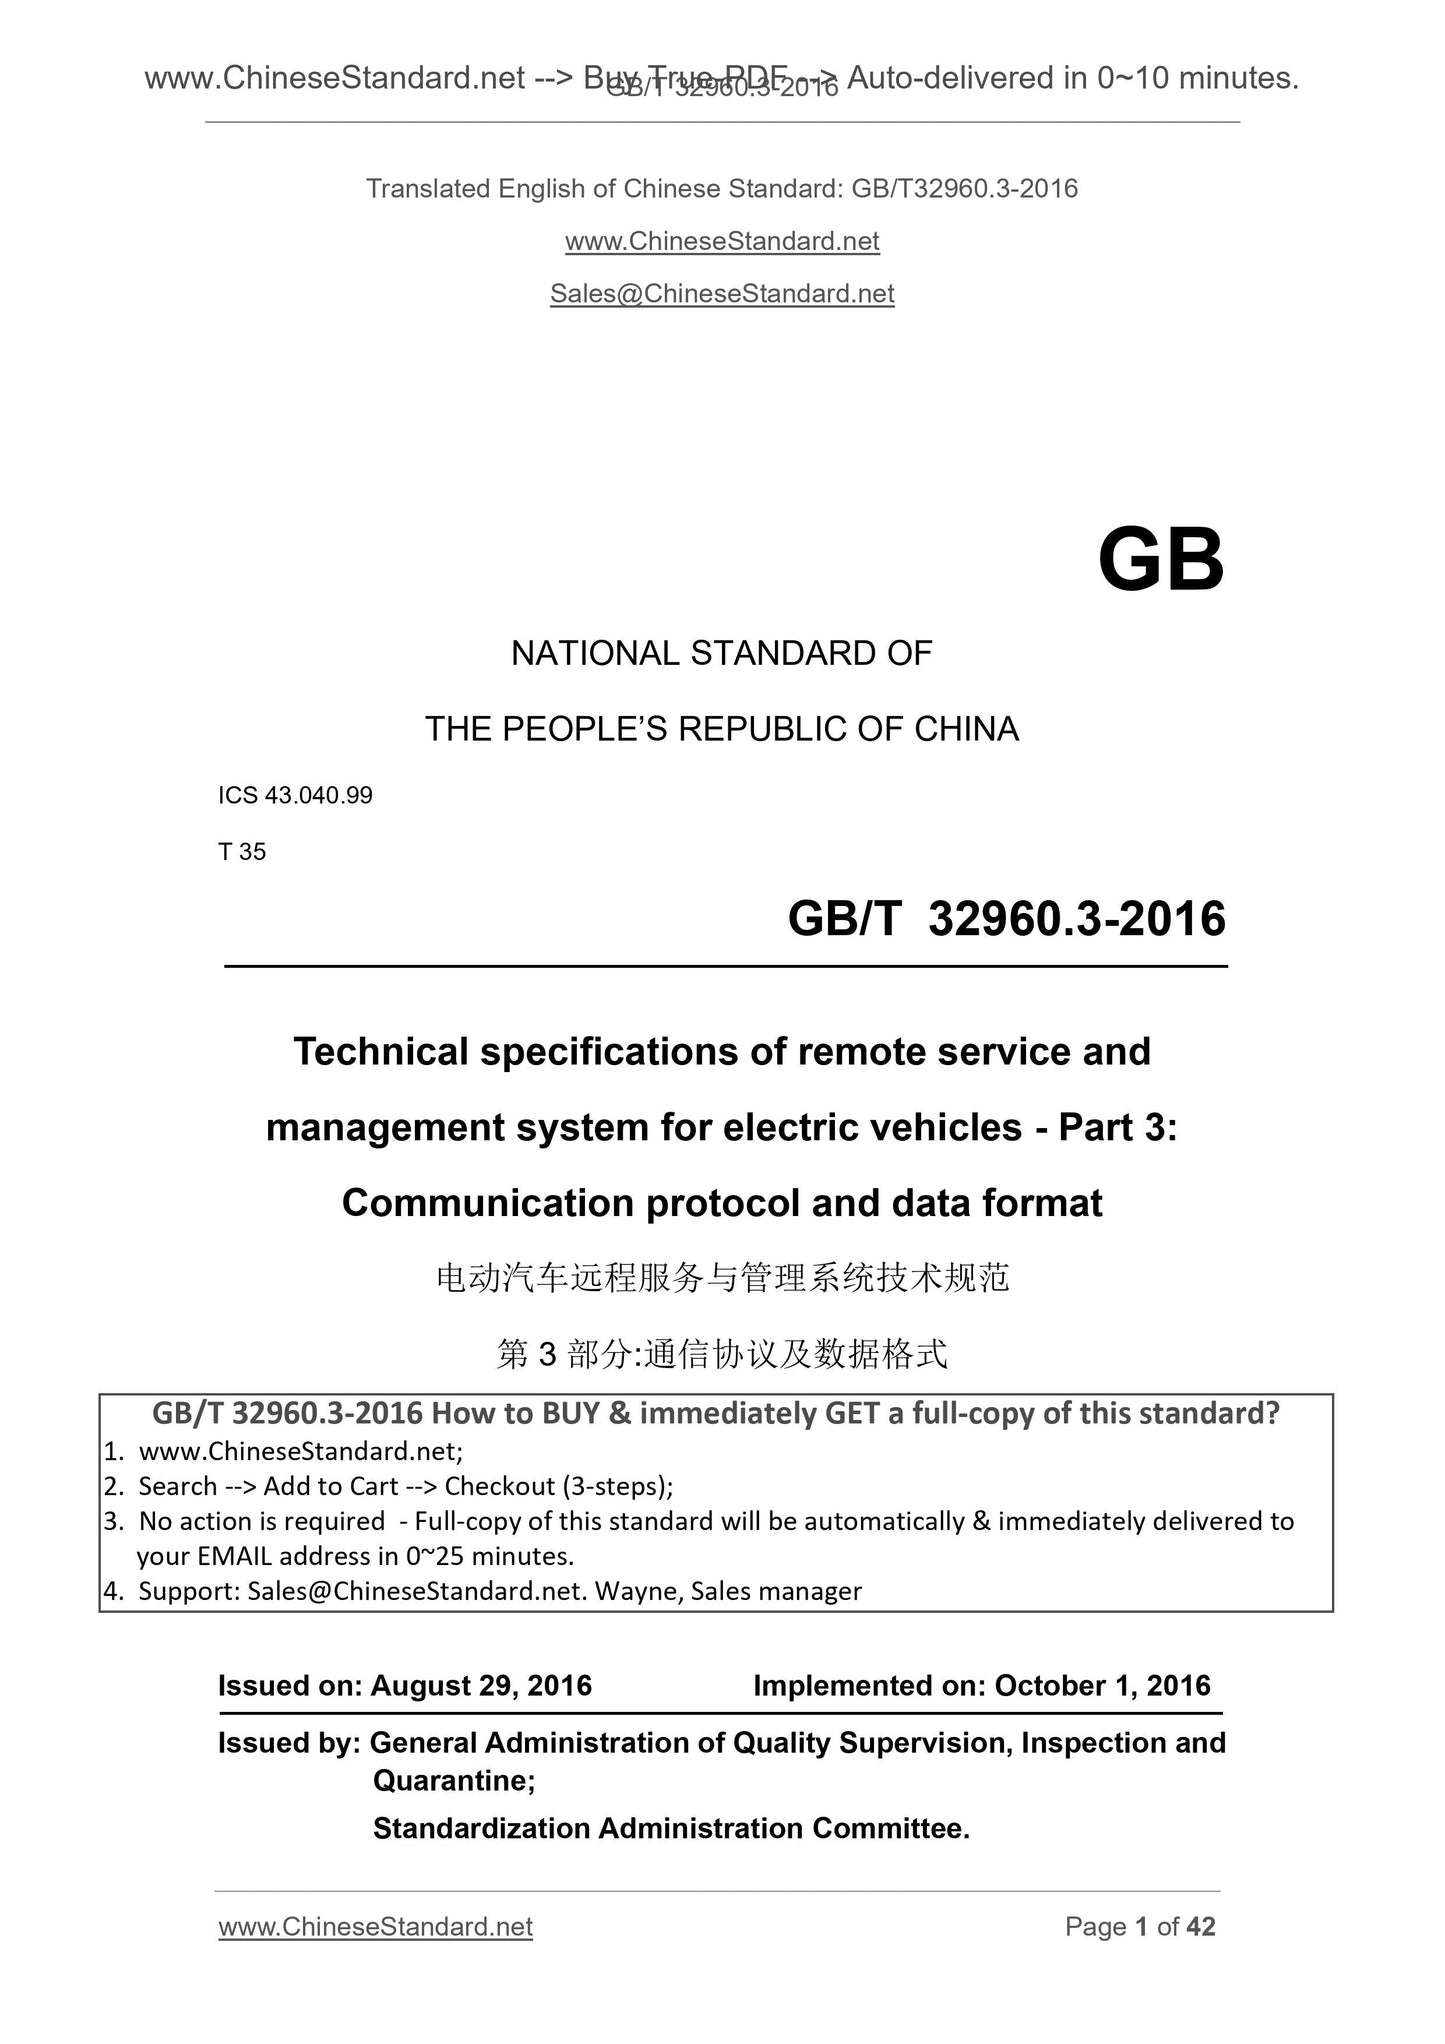 GB/T 32960.3-2016 Page 1